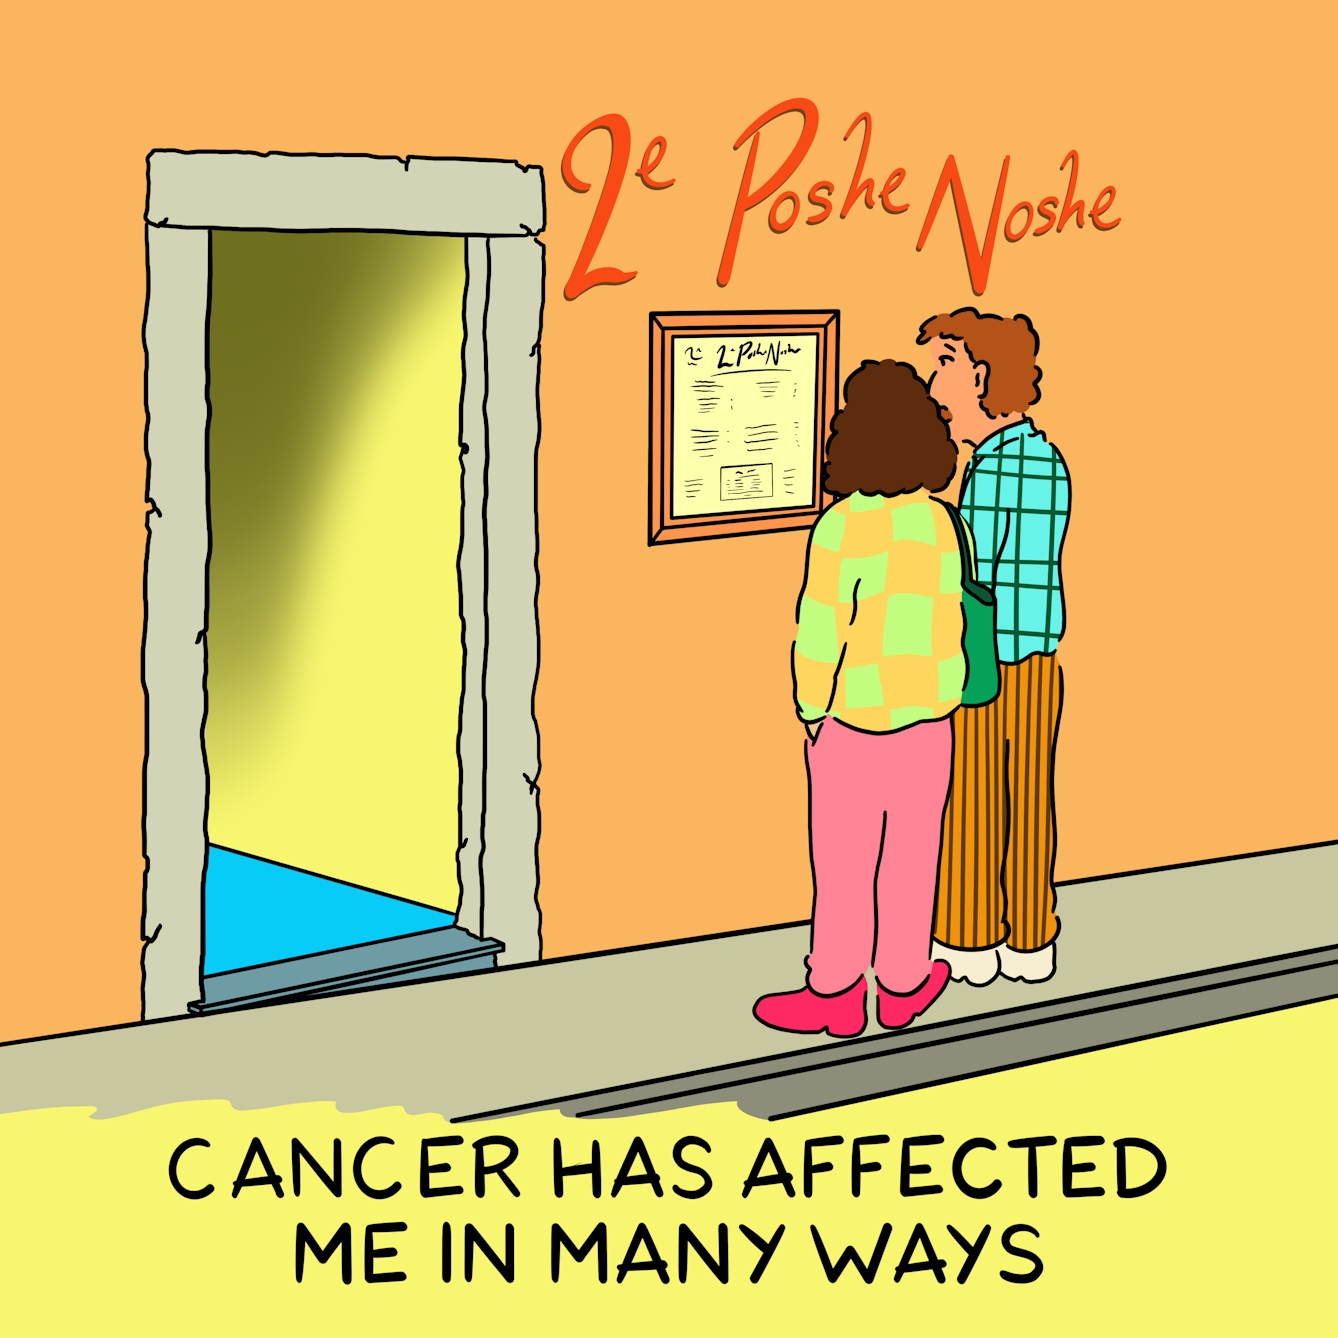 Panel 1 of a four-panel comic drawn digitally: a man with a plaid shirt and corduroy trousers stands outside Le Poshe Noshe restaurant reading the menu on the wall beside another person with a bright checked shirt, pink trousers and handbag. 
The caption text reads "Cancer has affected me in many ways"